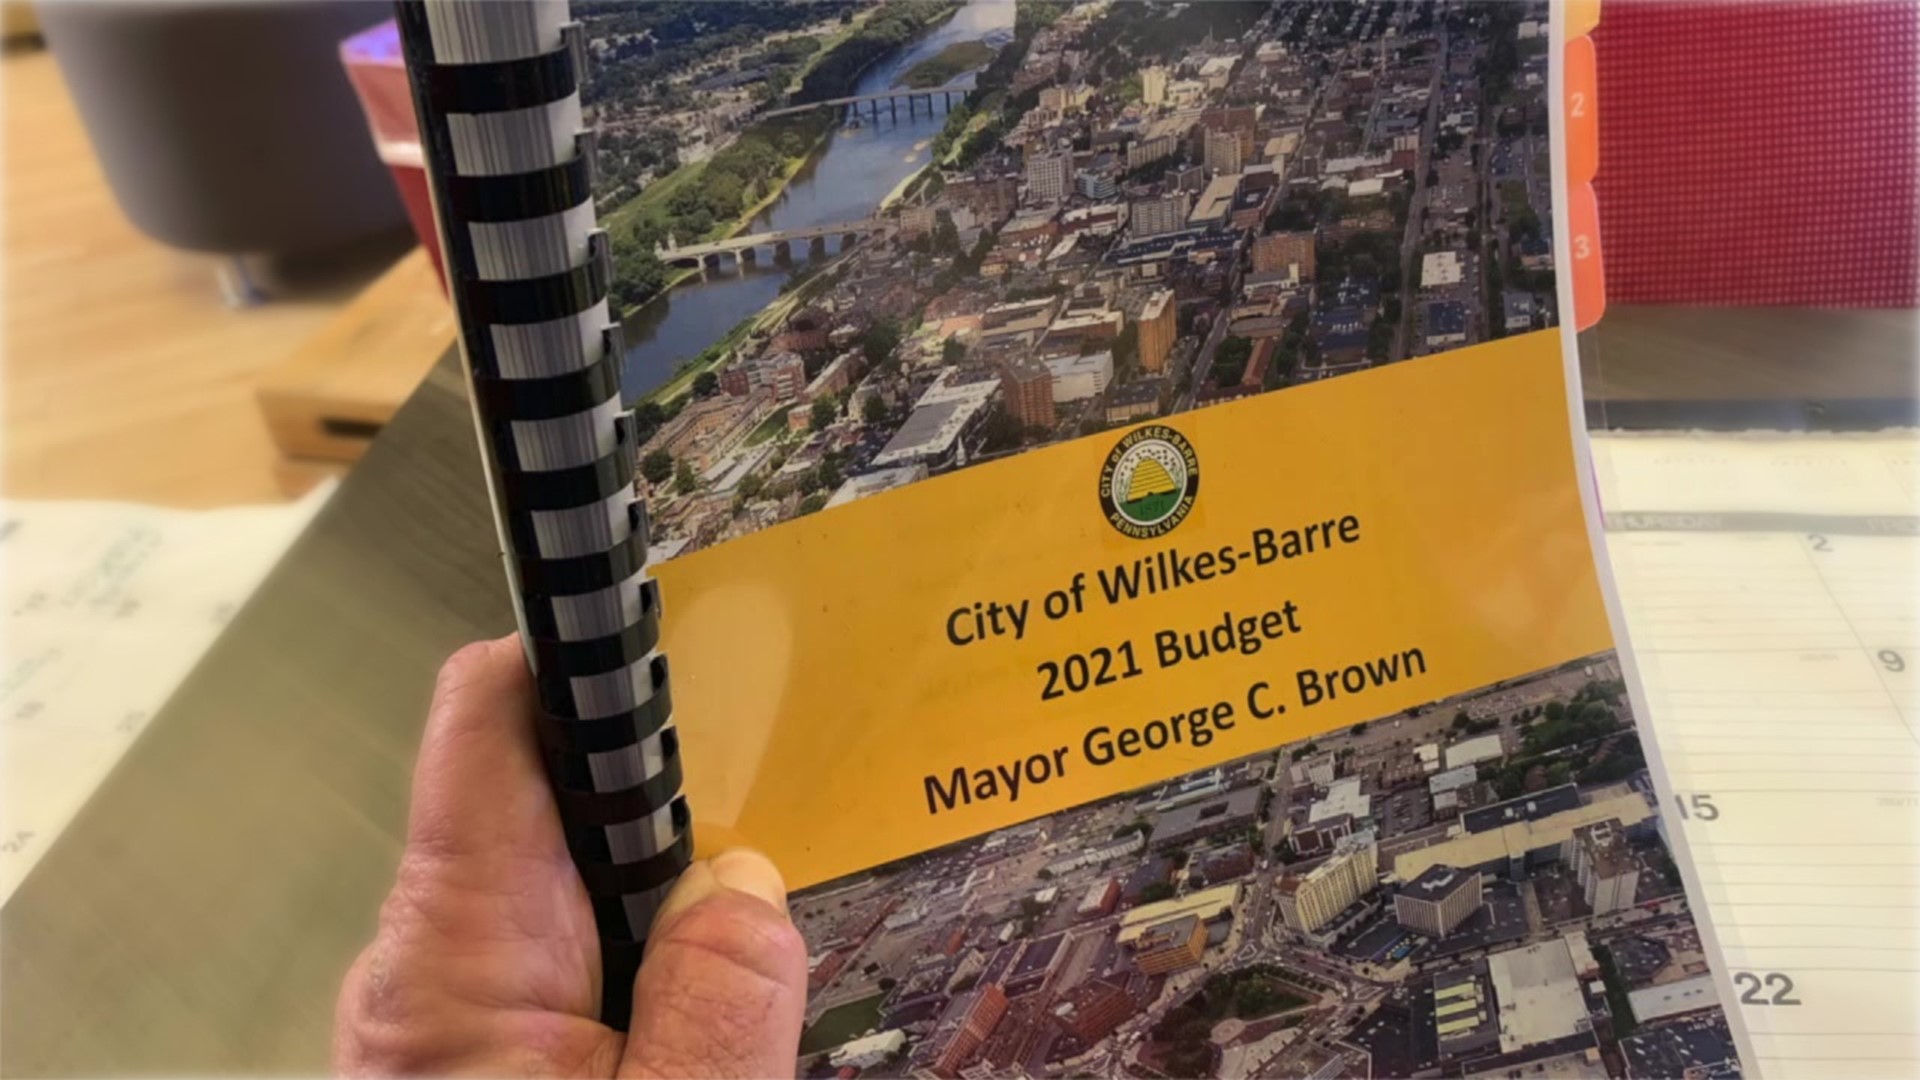 Doubling sewer and recycling fees proposed for 2021 budget in Wilkes-Barre.